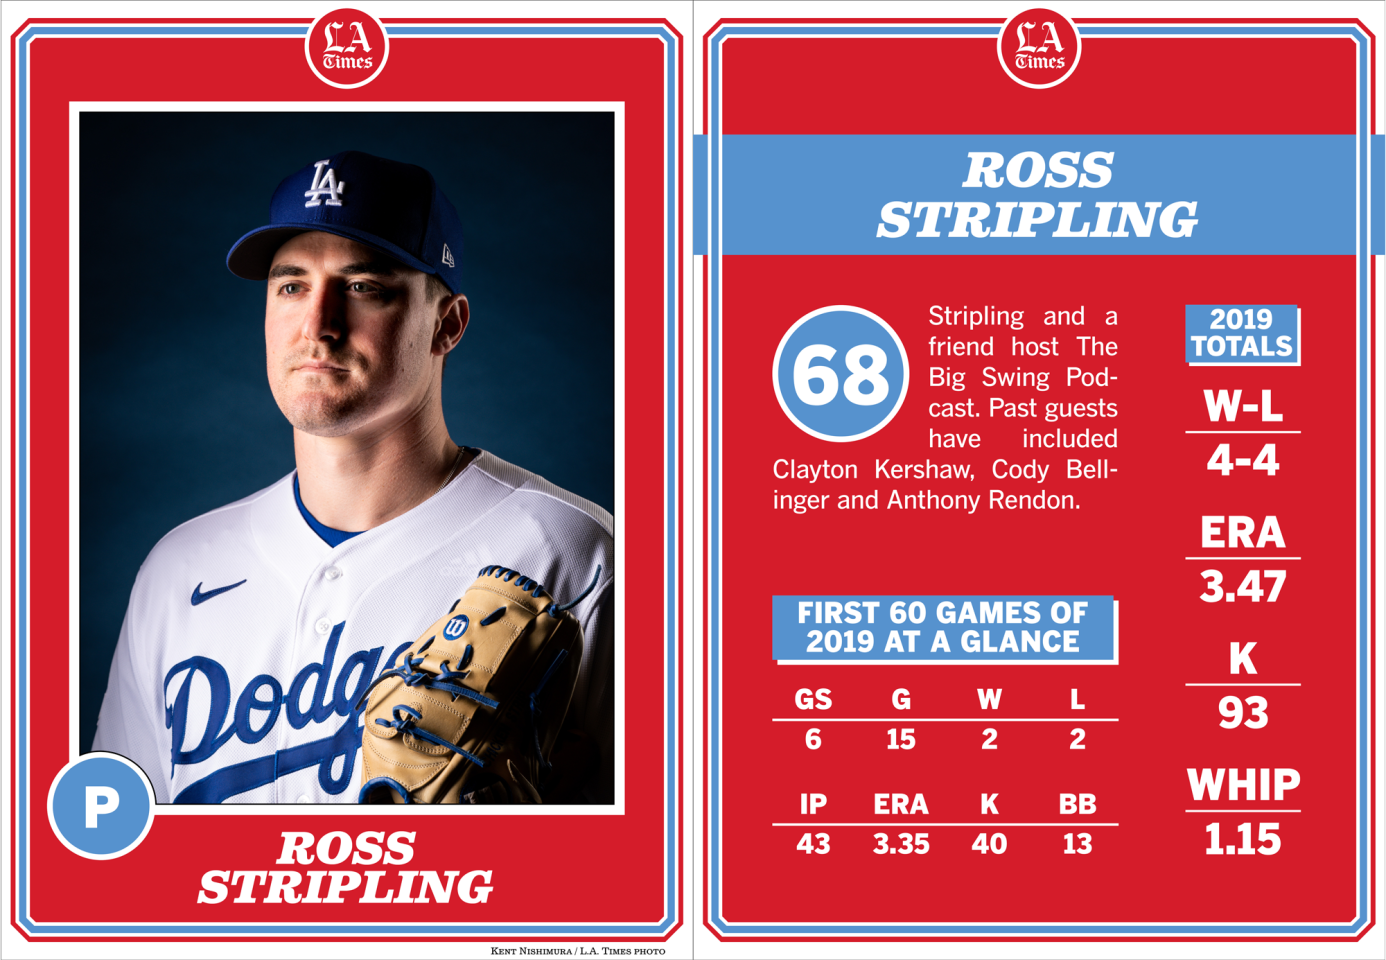 The 2020 Los Angeles Dodgers opening day team roster - Los Angeles